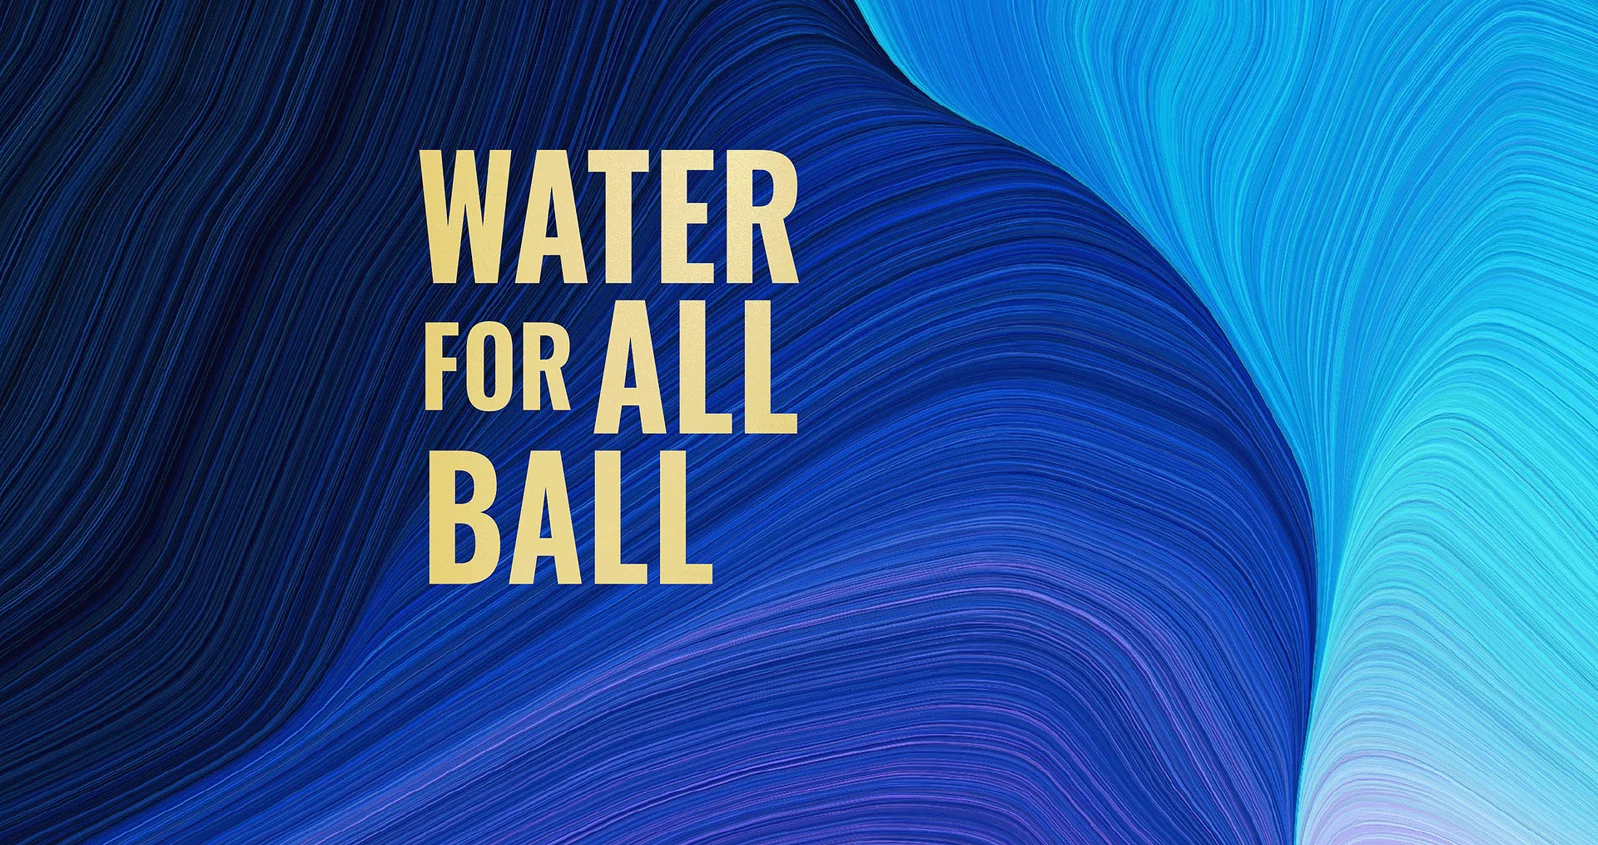  2022/05/WaterForAll_WEB_banner@0.3x-1.png 